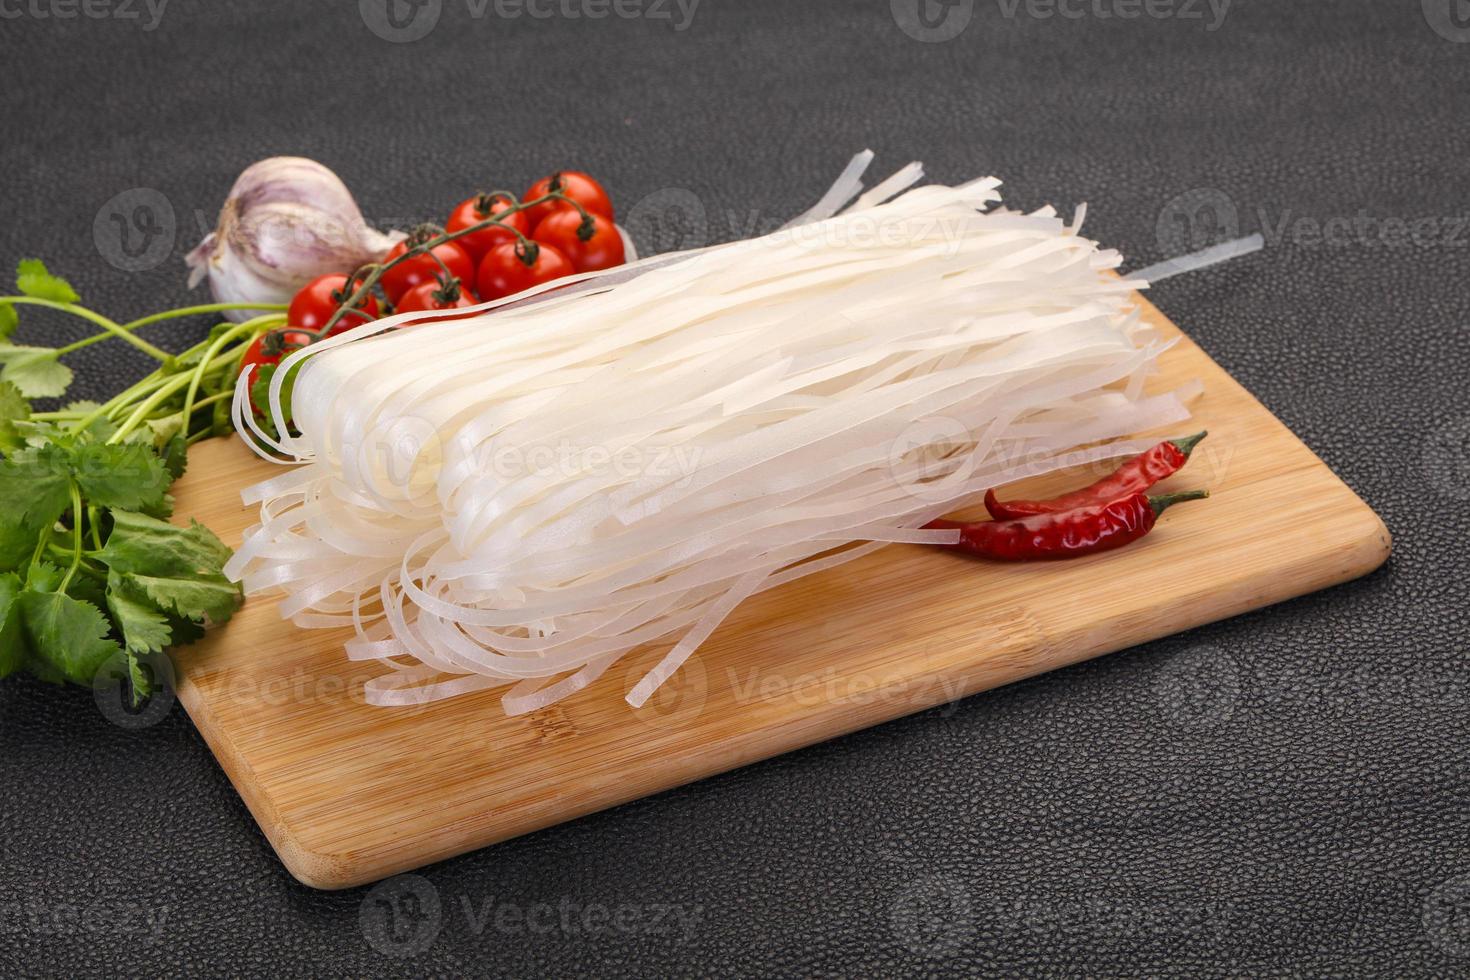 Raw rice noodles photo